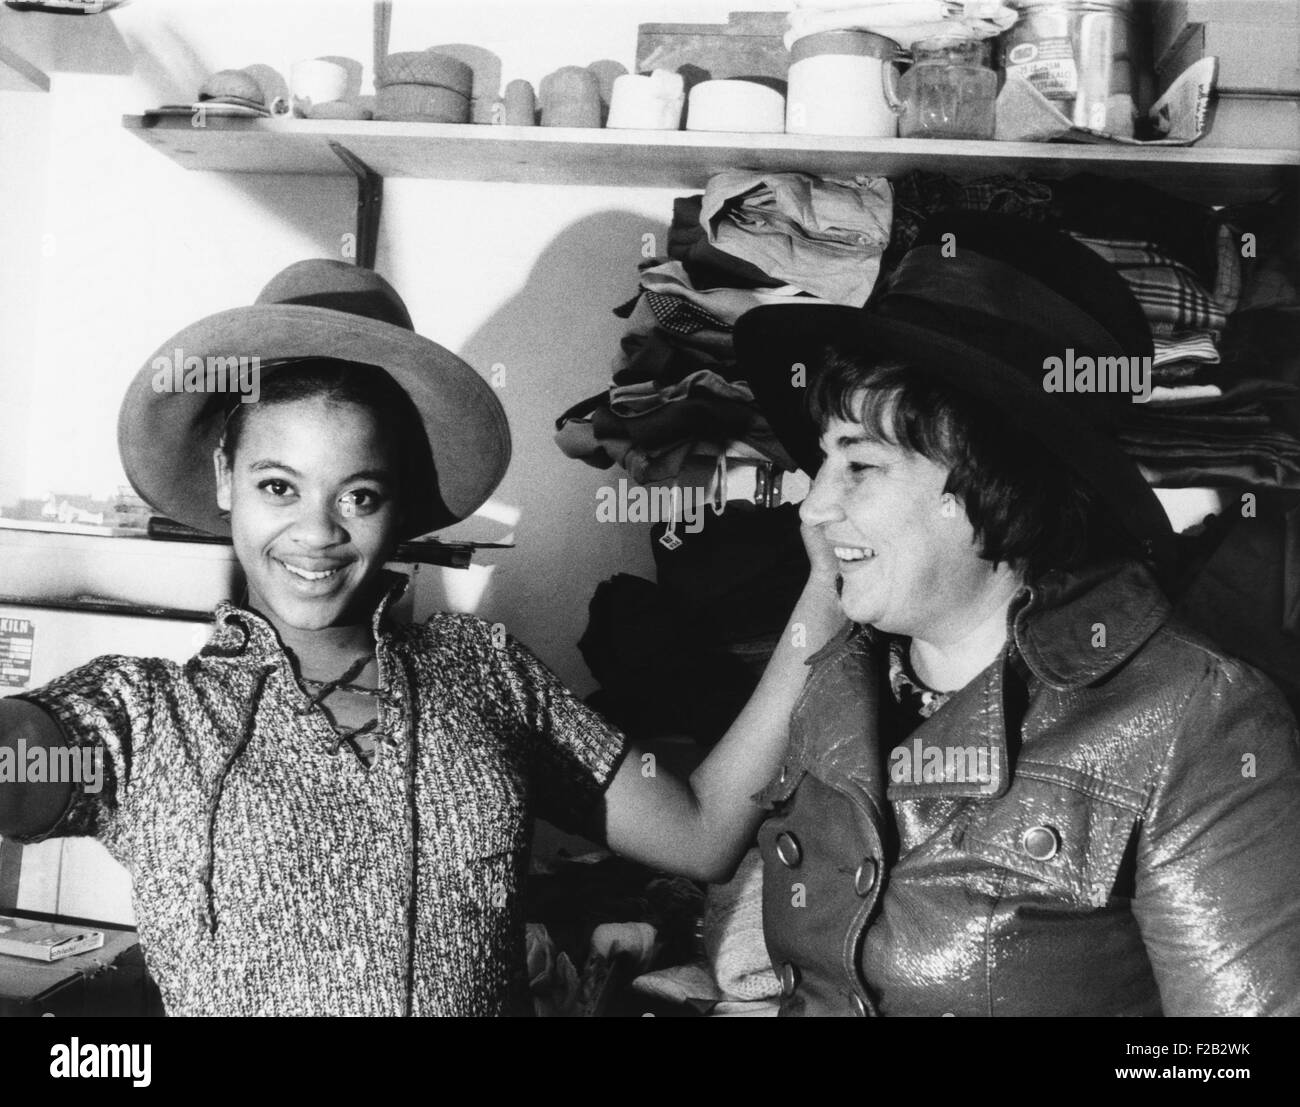 A high school student tries on one of Bella Abzug's wide brimmed campaign hats. Congresswomen-elect Abzug donated the hat to the boutique, 'Square Business', operated by a New York City School. Dec. 18, 1970. (CSU 2015 7 319) Stock Photo